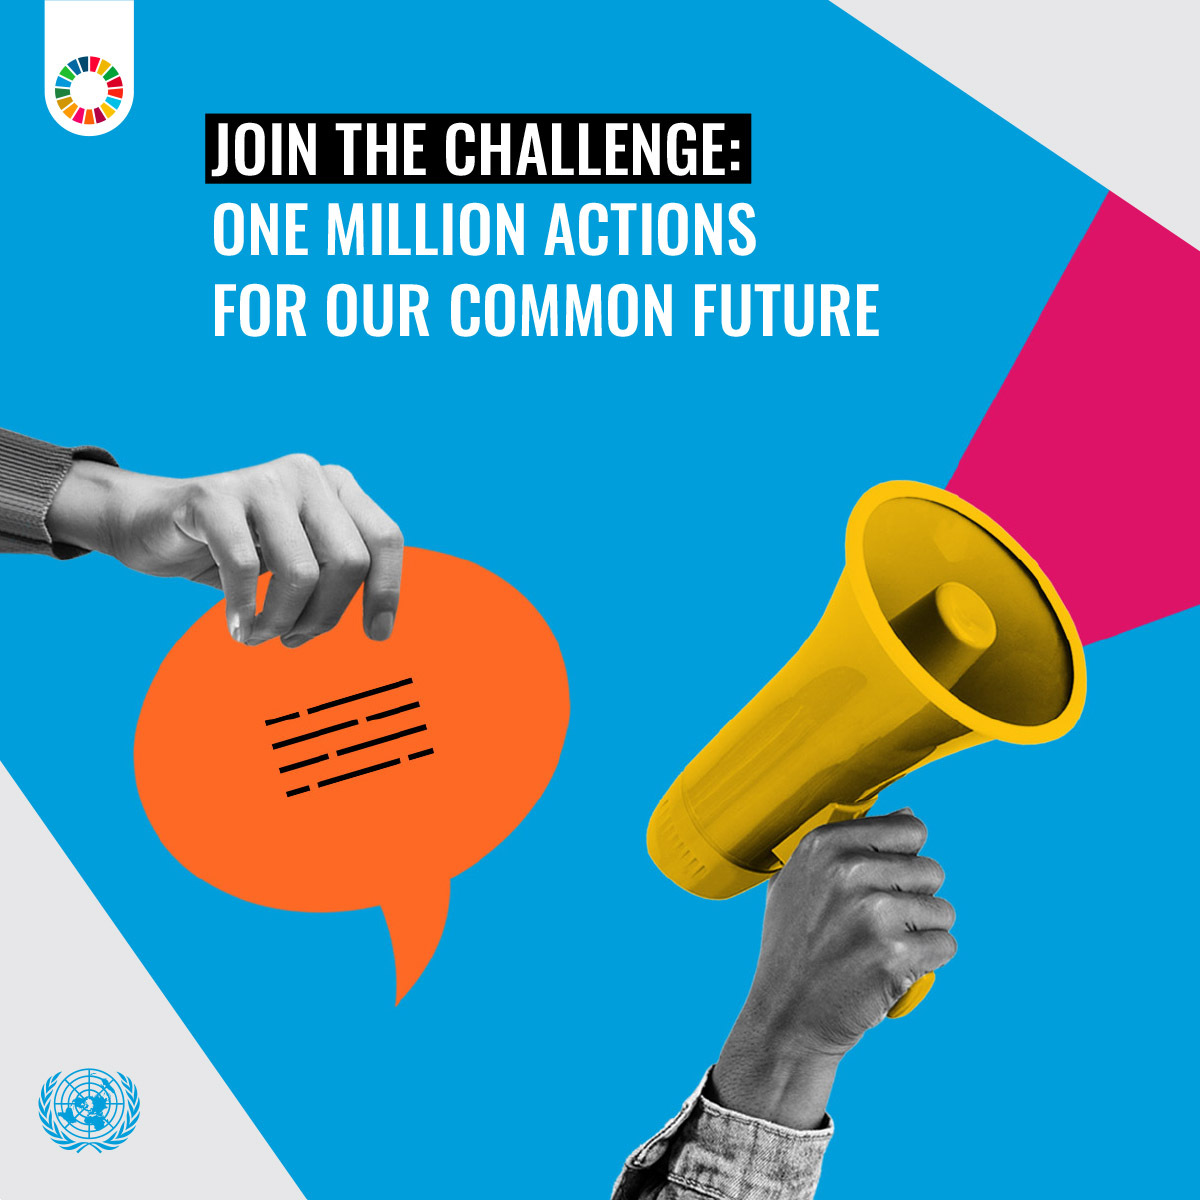 Speak up and let your voice be heard! World leaders will gather at the Summit of the Future this September to shape #OurCommonFuture! 🌏 From tech to peace, let's #ActNow to tackle today's challenges together. bit.ly/SoF24-challenge